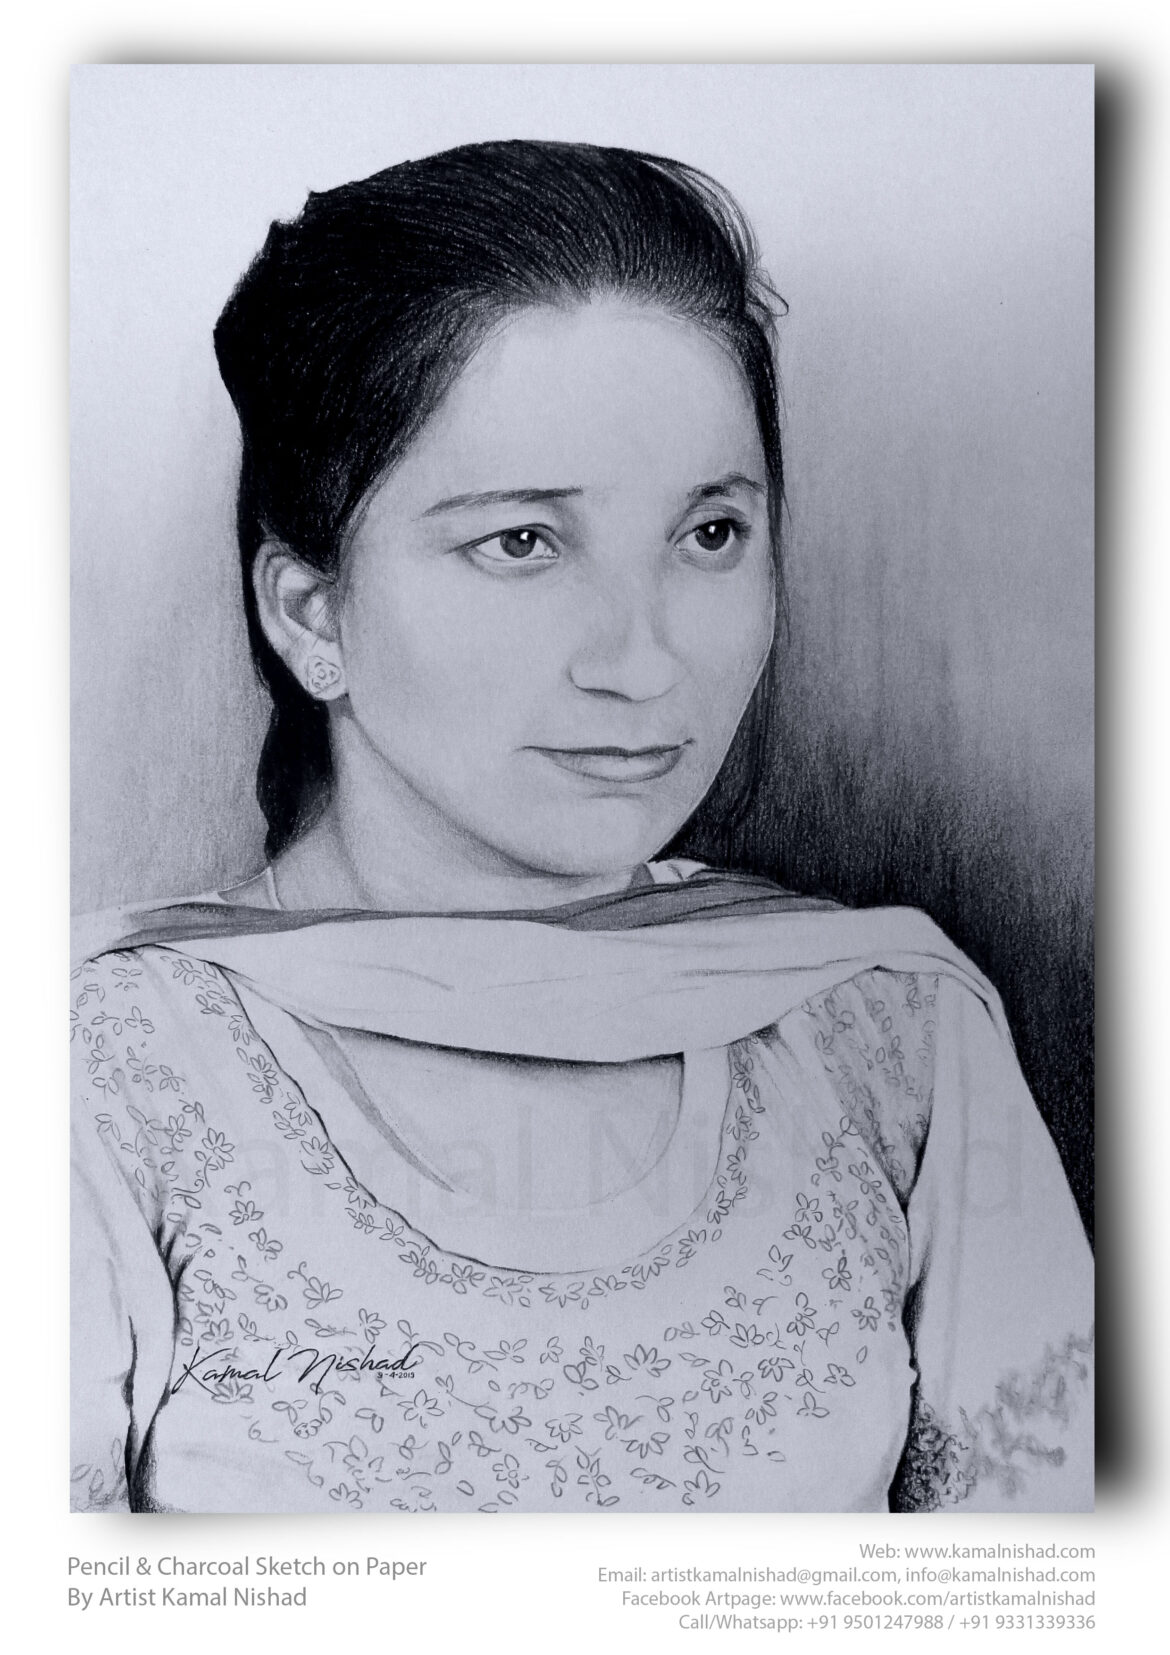 SMILE | Pencil & Charcoal Sketch This is a Handmade Sketch made with Pencil & Charcoal “SMILE”. One of my client/customer (FEMALE), wanted me to draw her MOM’s portrait for her birthday present. So that here is the result. SIZE: A3 Created by © Kamal Nishad. All rights reserved.